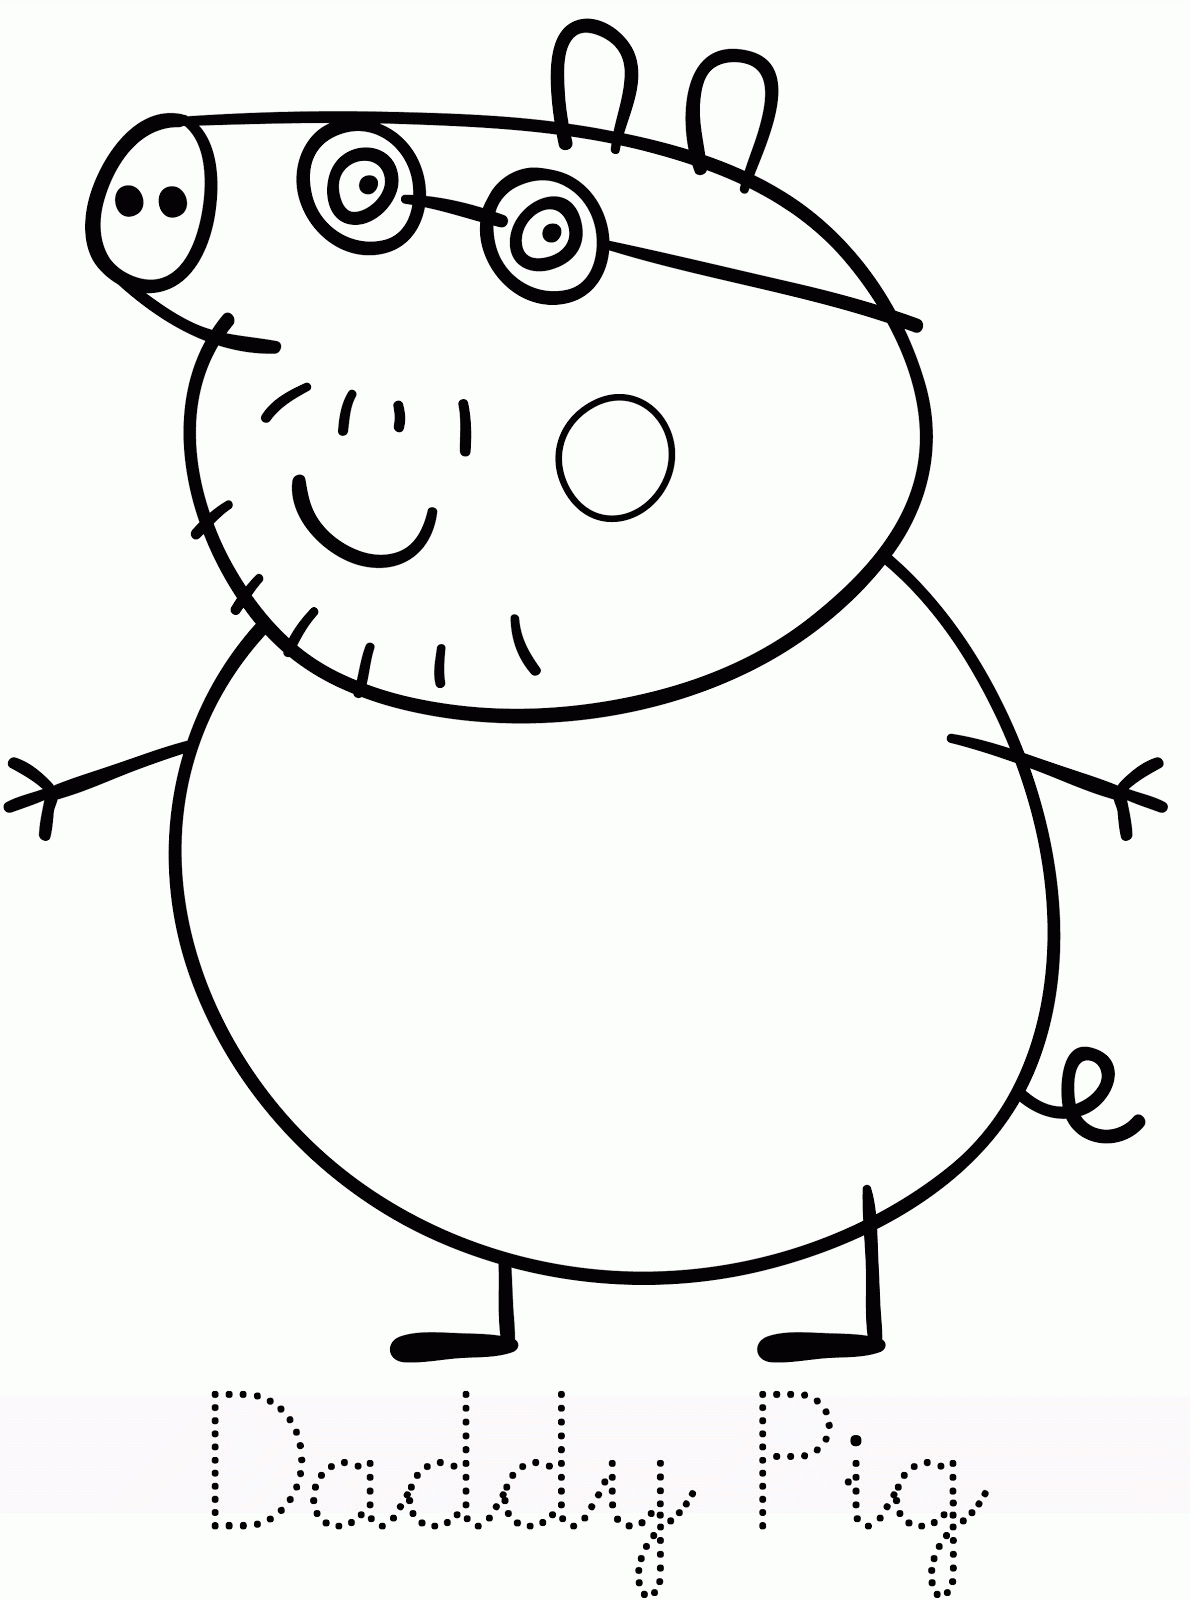 Peppa Pig Coloring Pages | Peppa Pig Coloring Pages